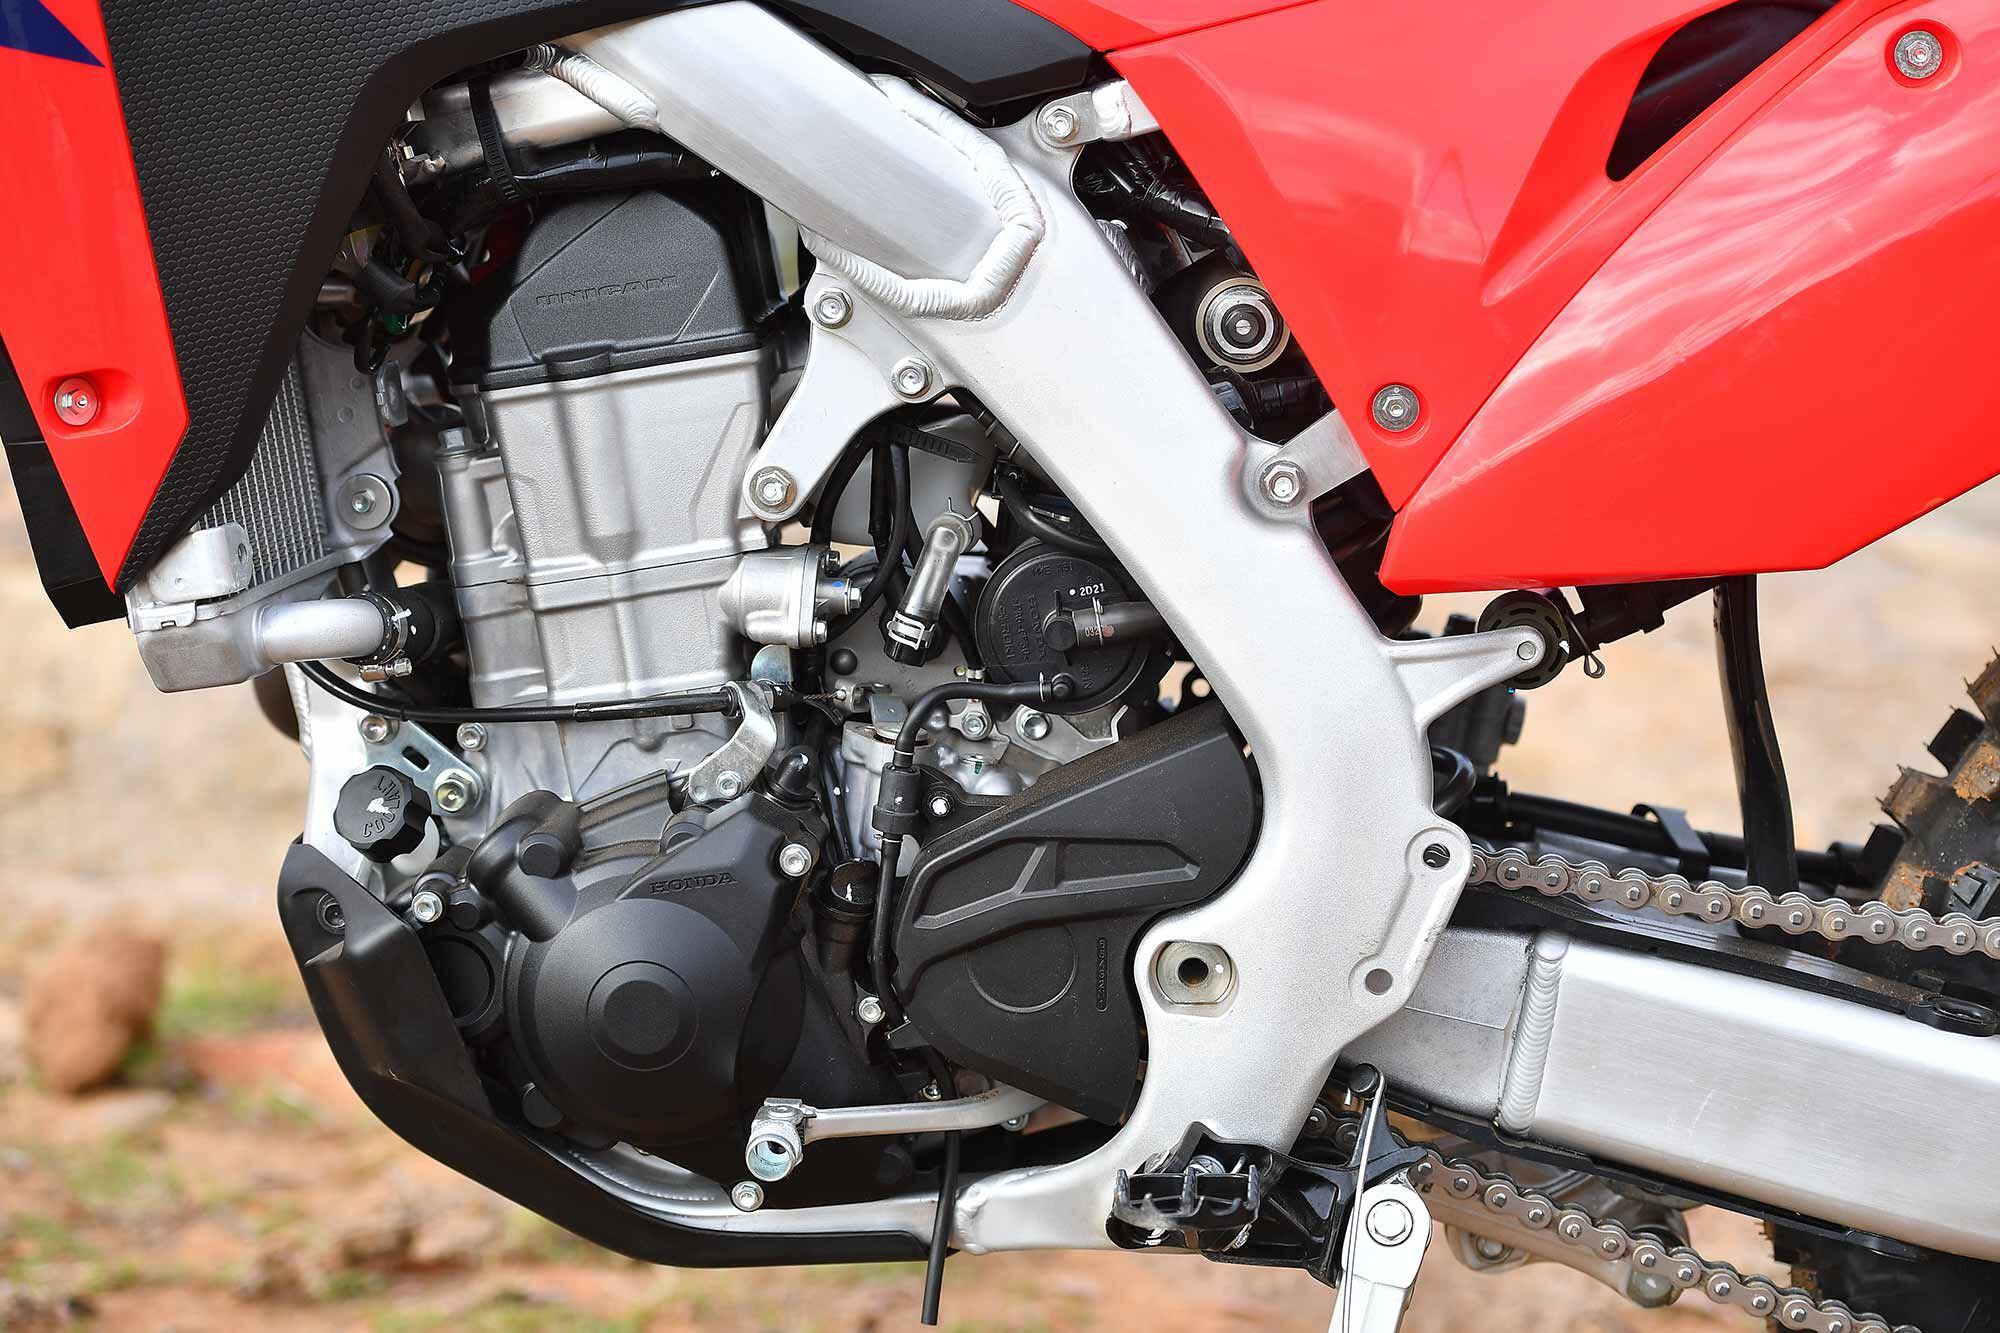 Left-side detail shot. The plastic ignition cover and countershaft sprocket guards are removable for those looking to simplify the design. The wide-ratio six-speed transmission means the CRF450X has the bones to go extremely fast, rider willing.